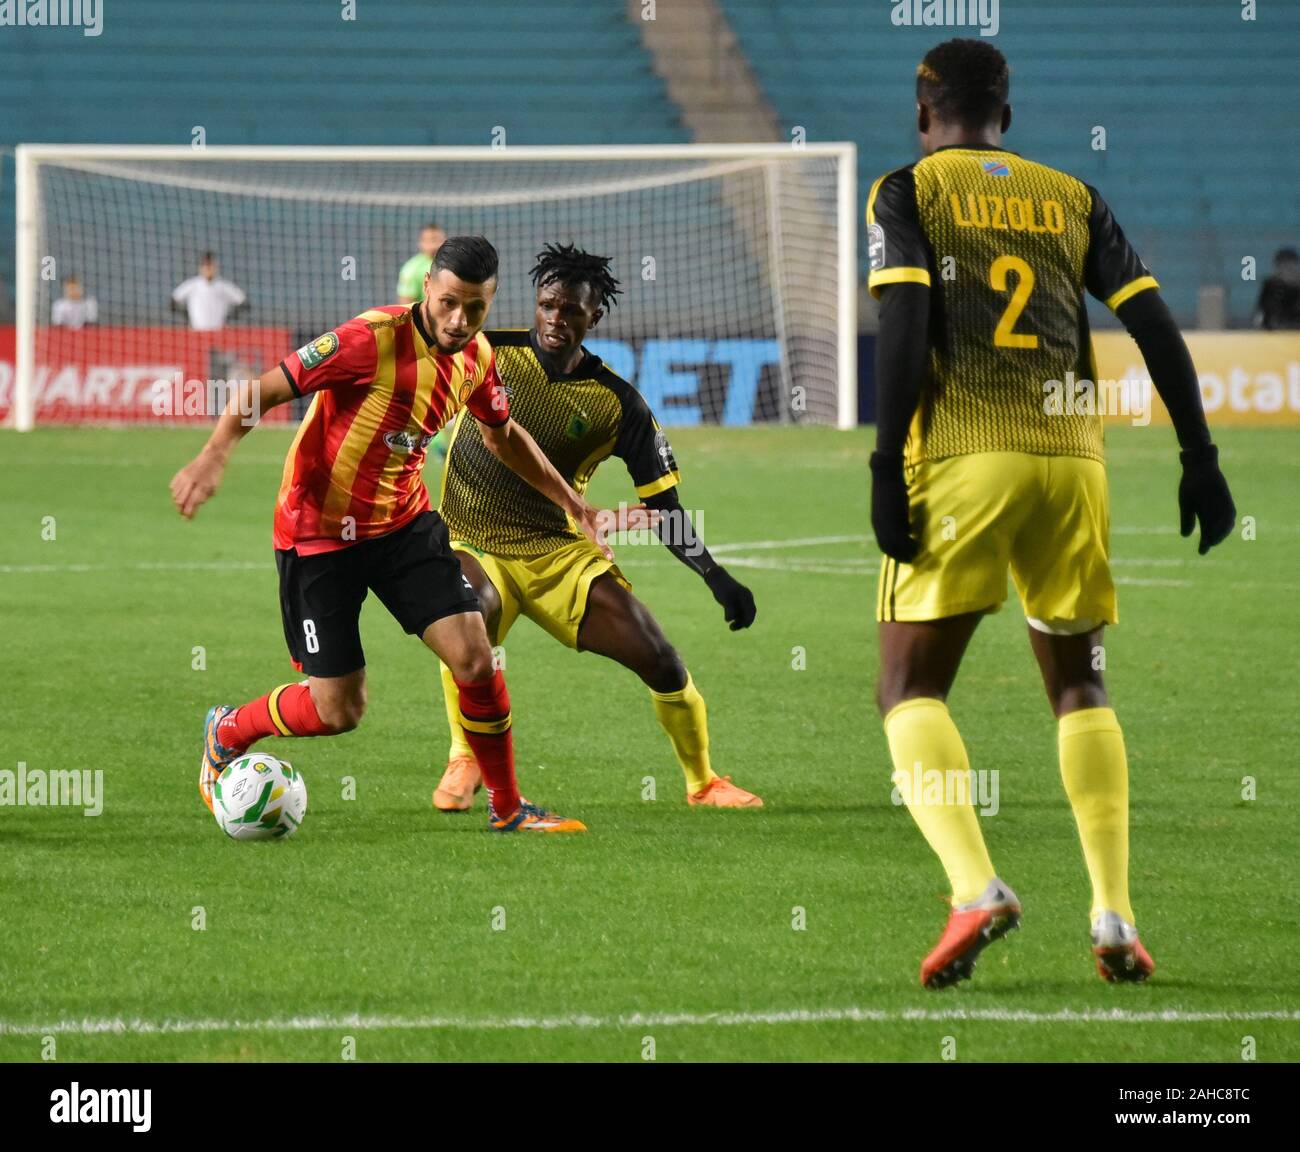 Rades, Tunisia. 27th Dec, 2019. Esperanc's Player Anice Badri and AS V.club  player Avandogo Luete Mustafa are seen in action during the CAF Champions  League 2019 - 20 football match between Esperance